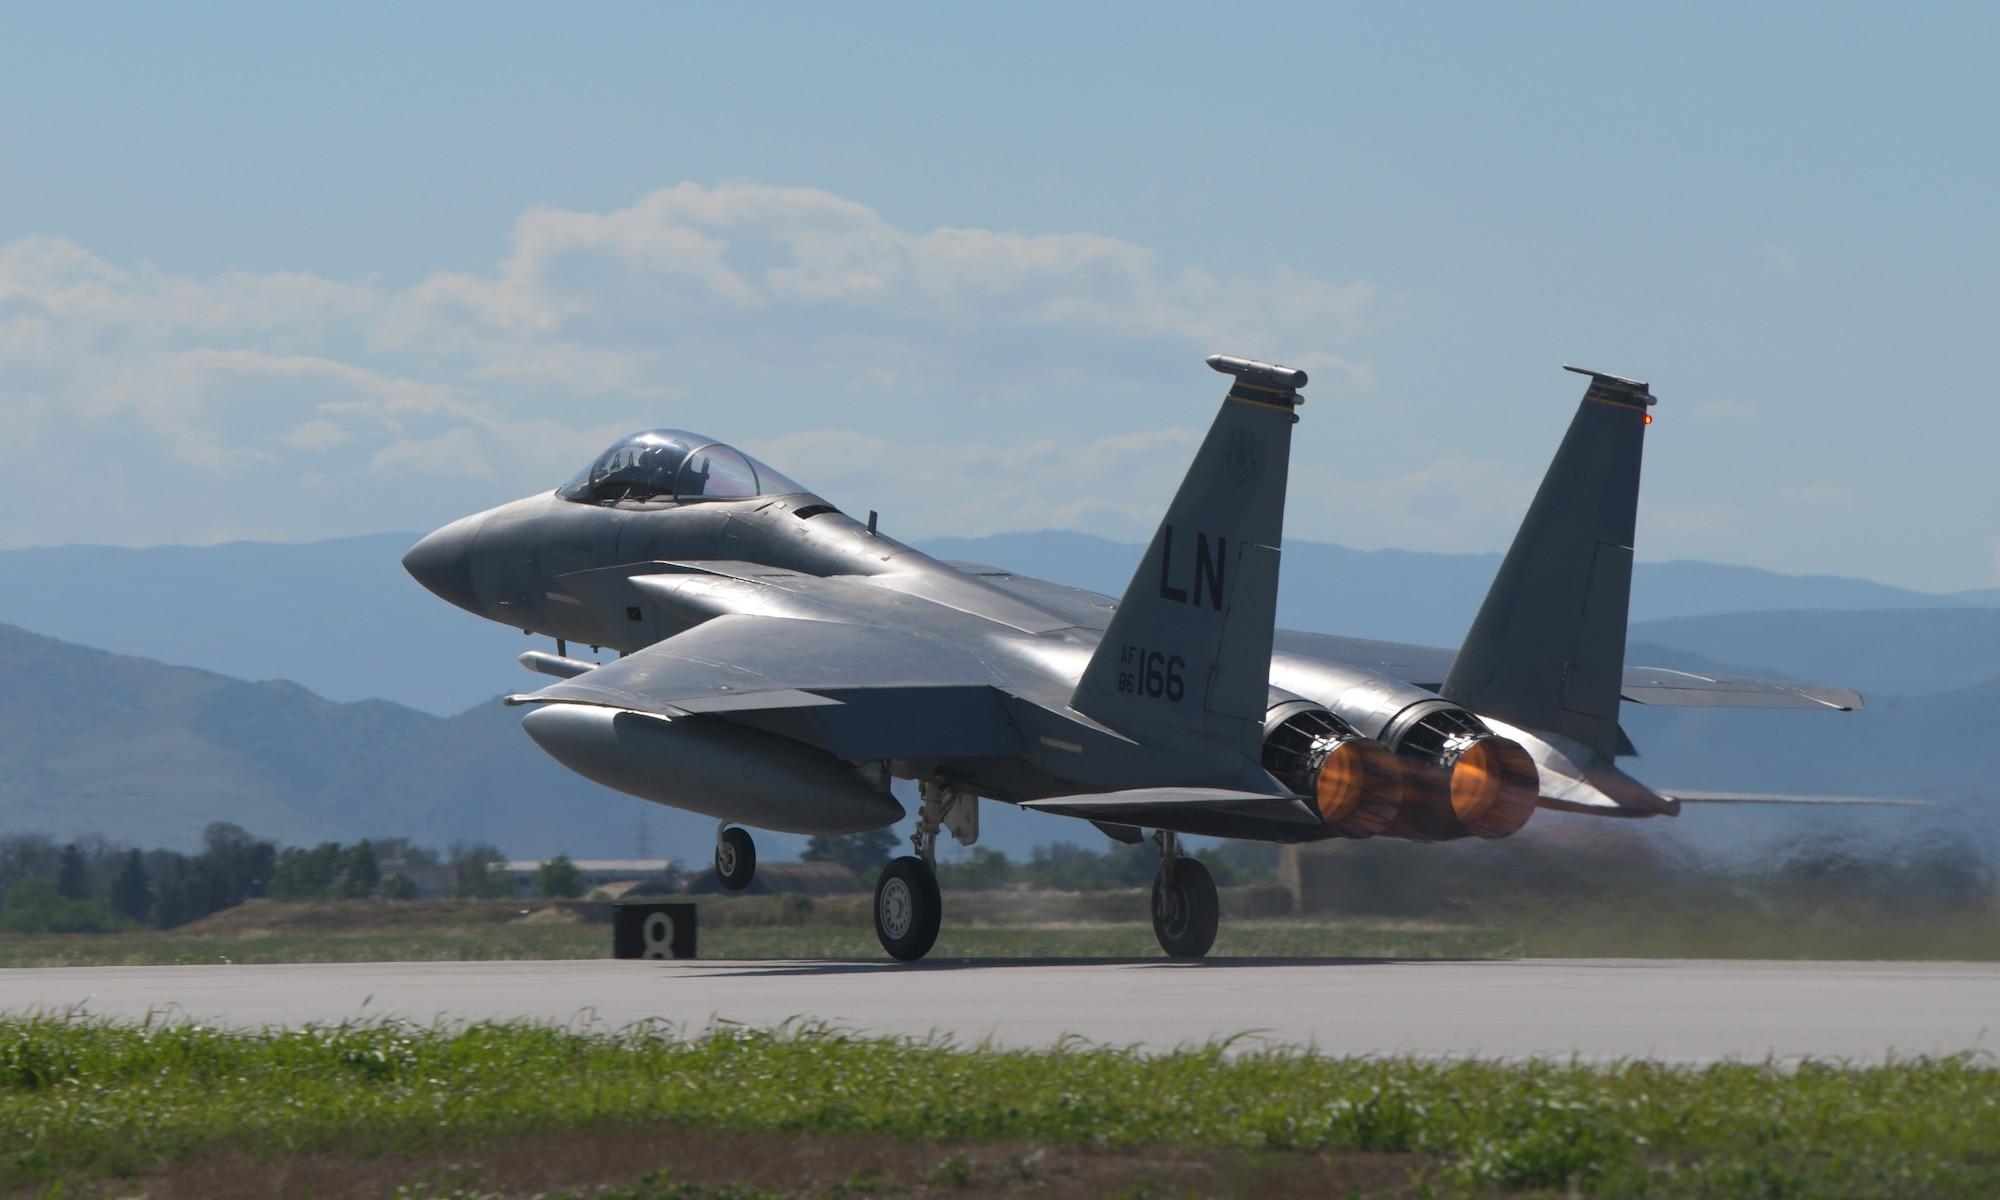 A U.S. Air Force F-15C Eagle assigned to the 493rd Fighter Squadron takes off during exercise Astral Knight 21 at Larissa Air Base, Greece, May 17, 2021. During exercises like Astral Knight, U.S. forces sharpen their ability to deploy capable, credible forces to operate from strategic locations enabled by strong regional partnerships. (U.S. Air Force photo by Tech. Sgt. Alex Fox Echols III)